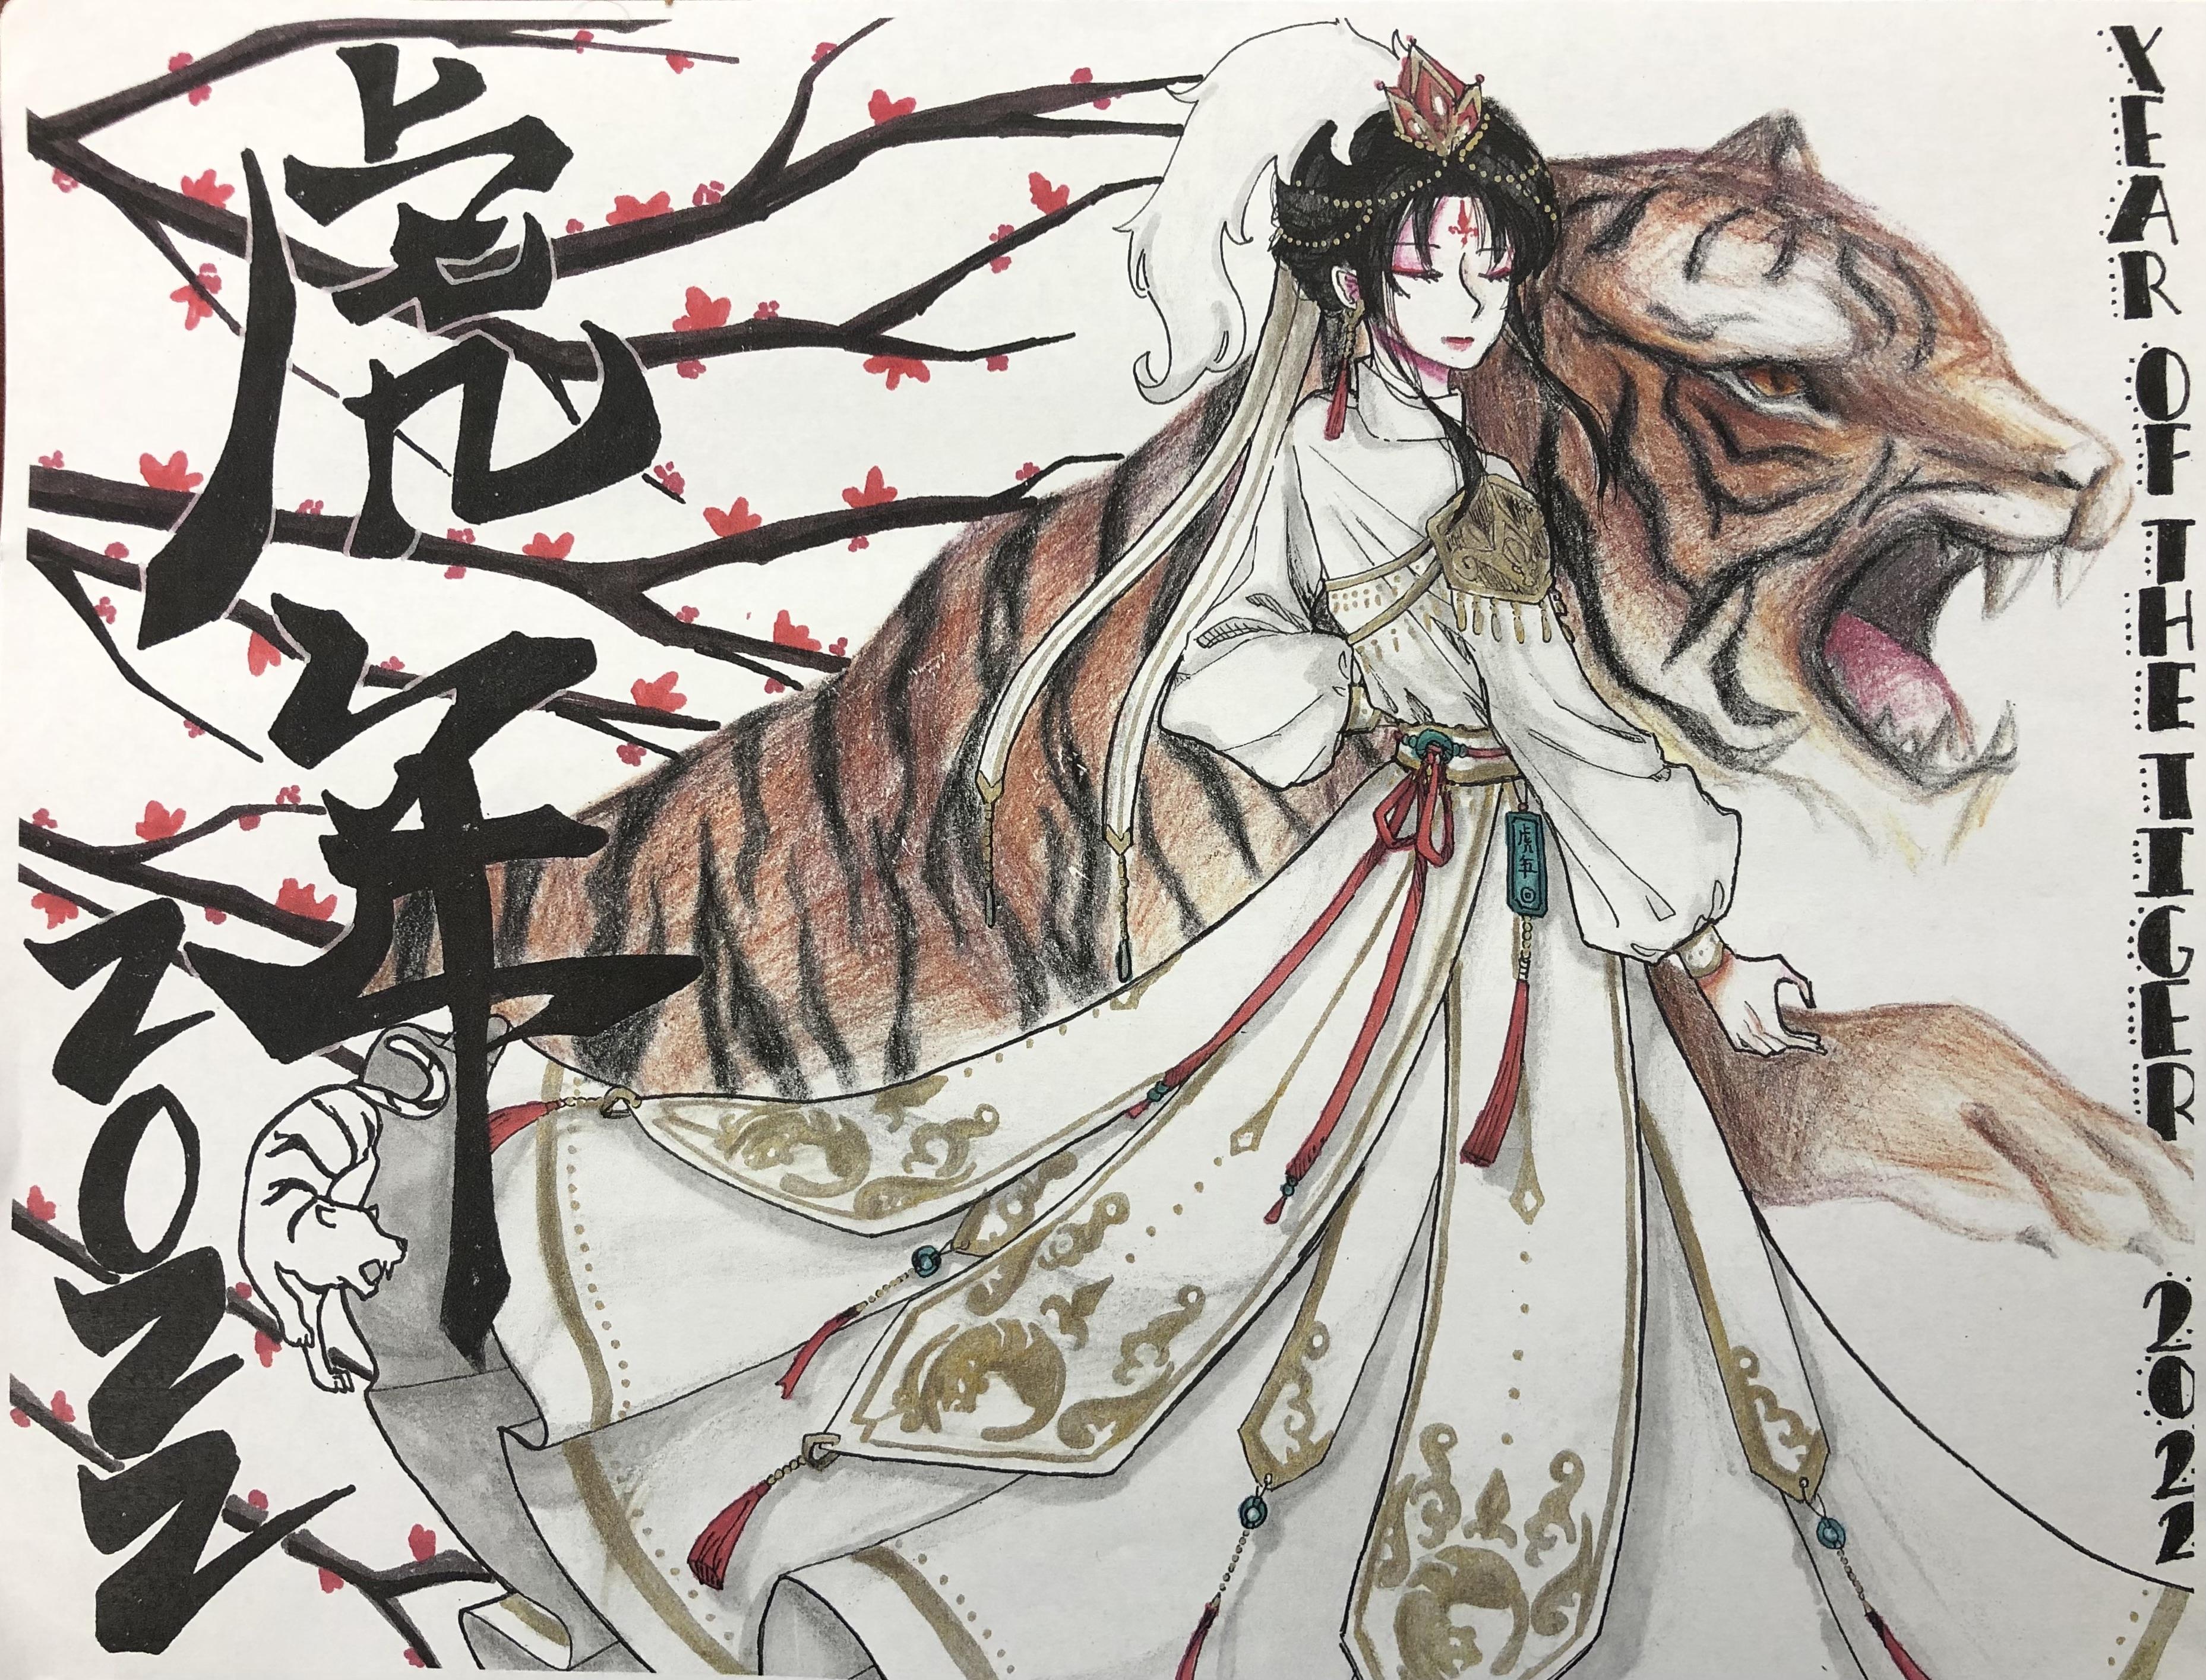  "Year of the Tiger" art competition winner